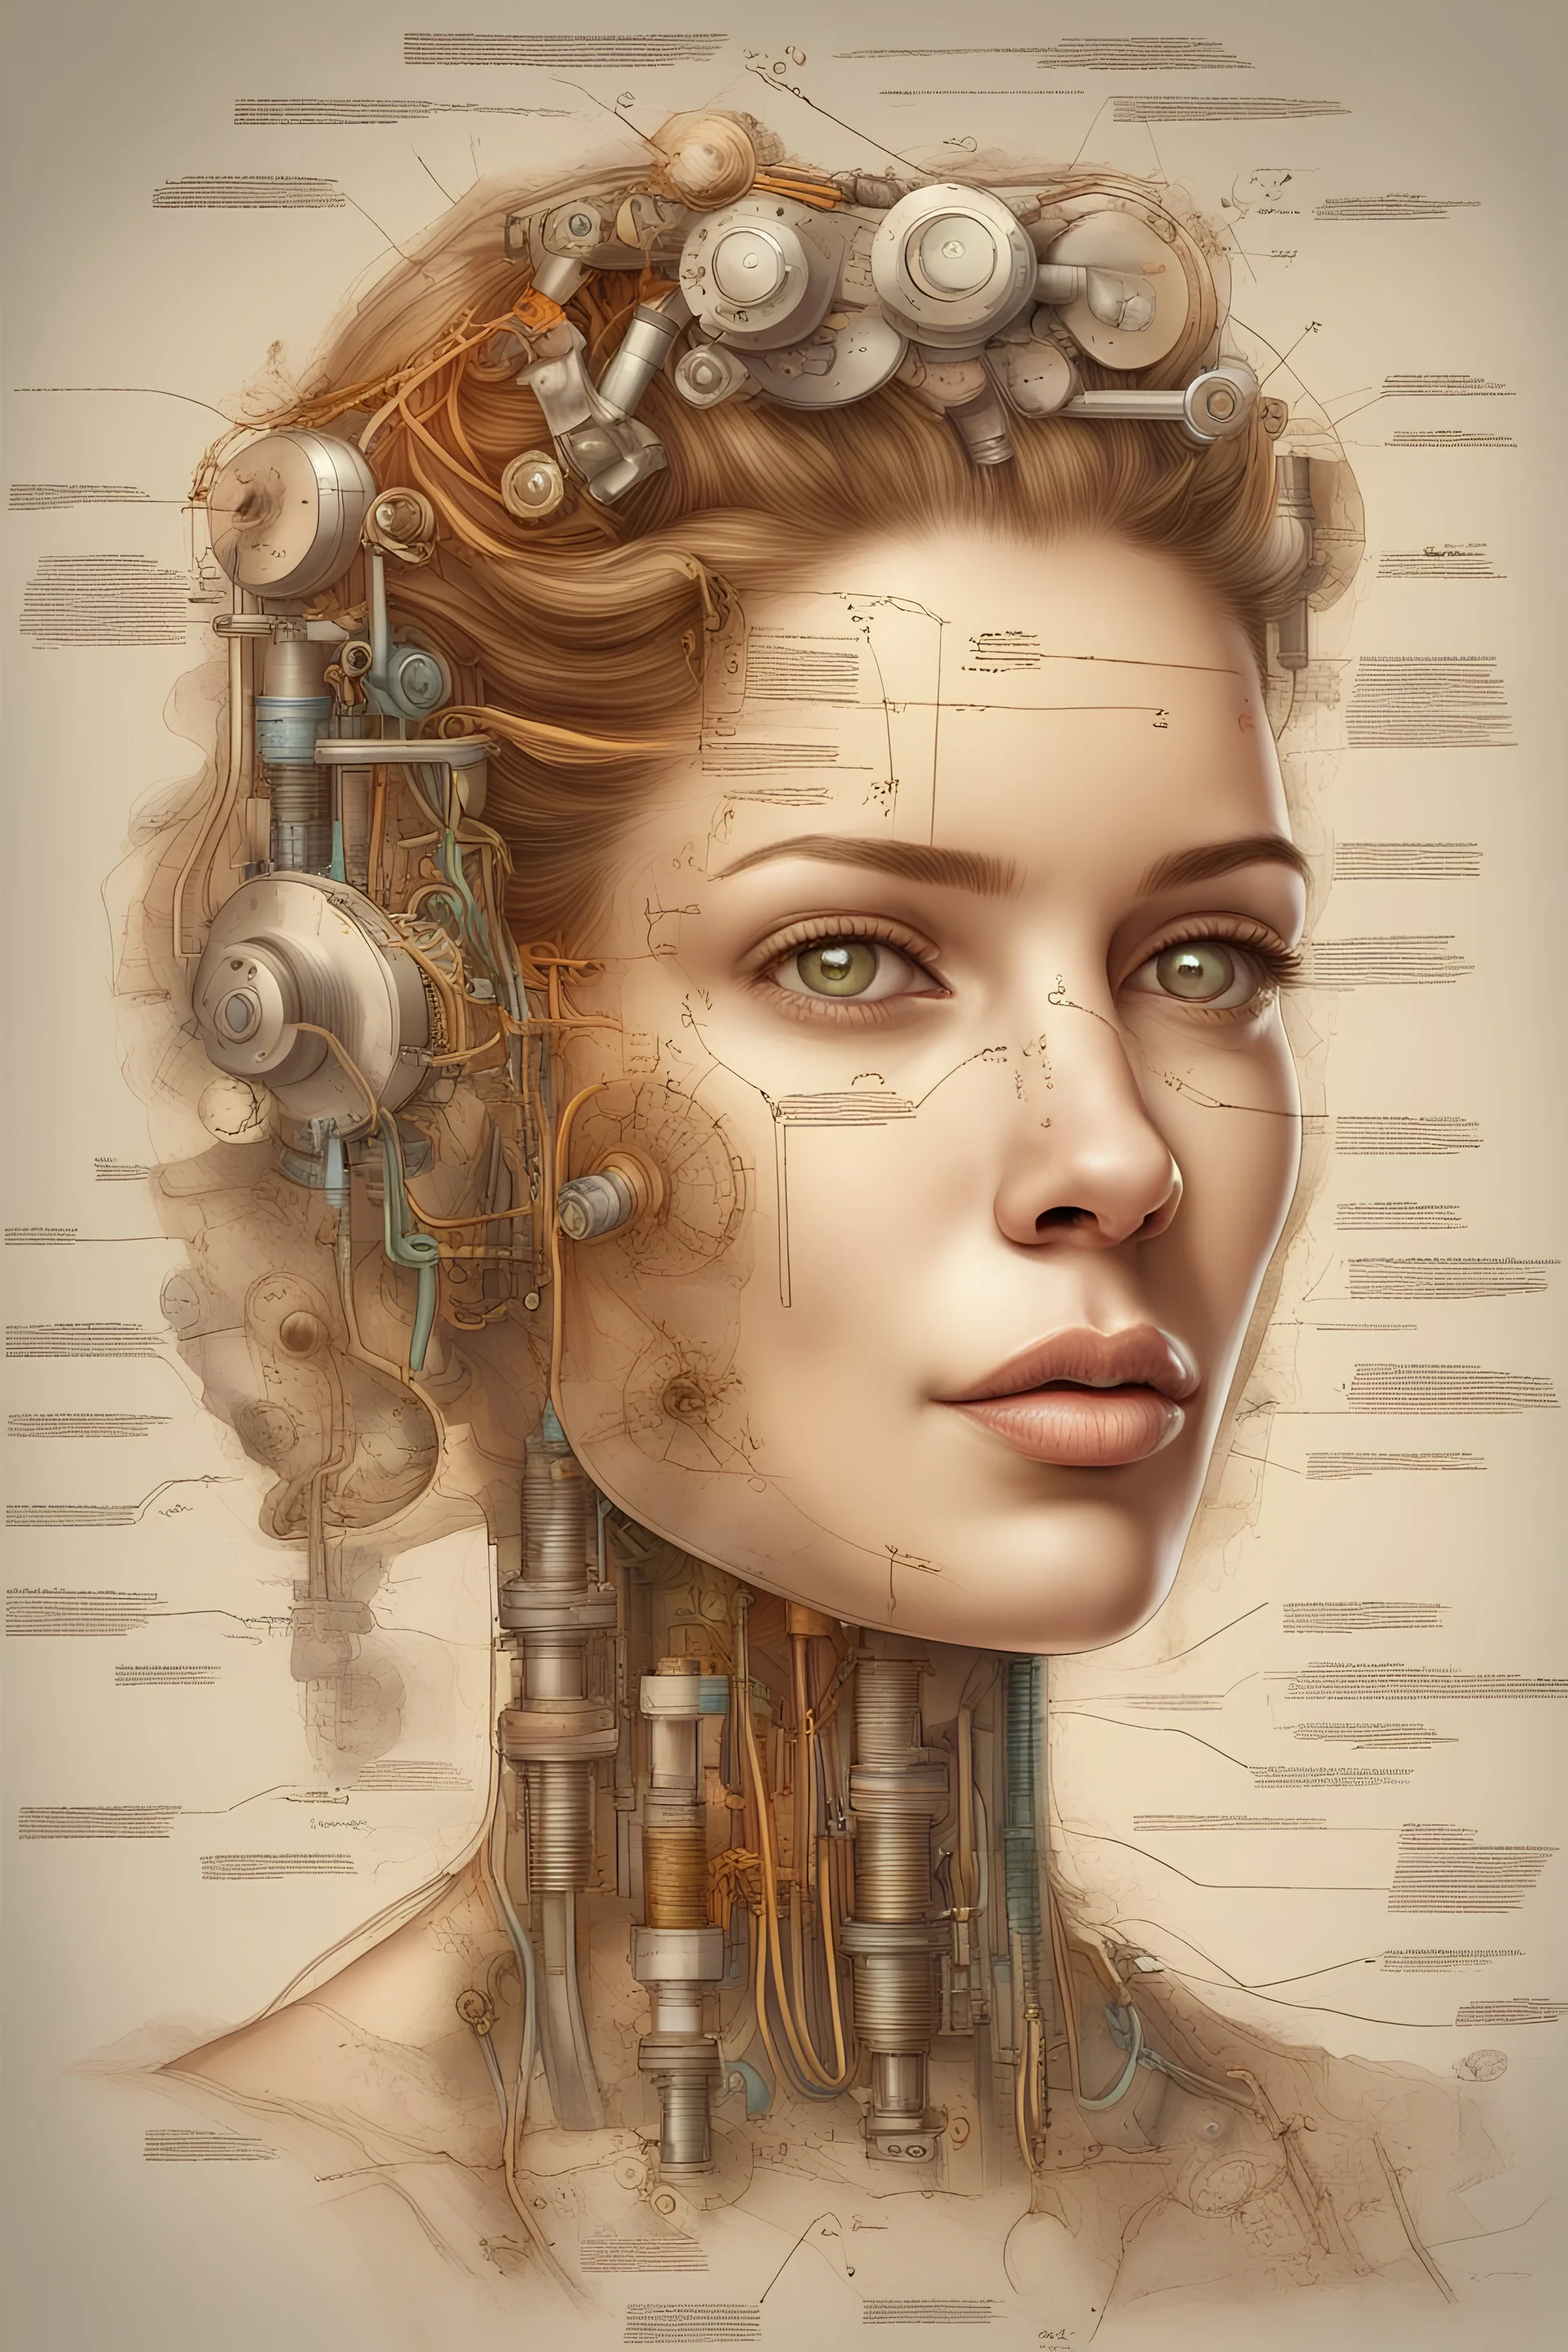 A realistic complex colorful illustration of an bio mechanic woman face portrait, composed of various components such as valves, springs, bolts, and circuits with some drawings, diagrams and notes explaining how it works in Leonardo codex background, concept art